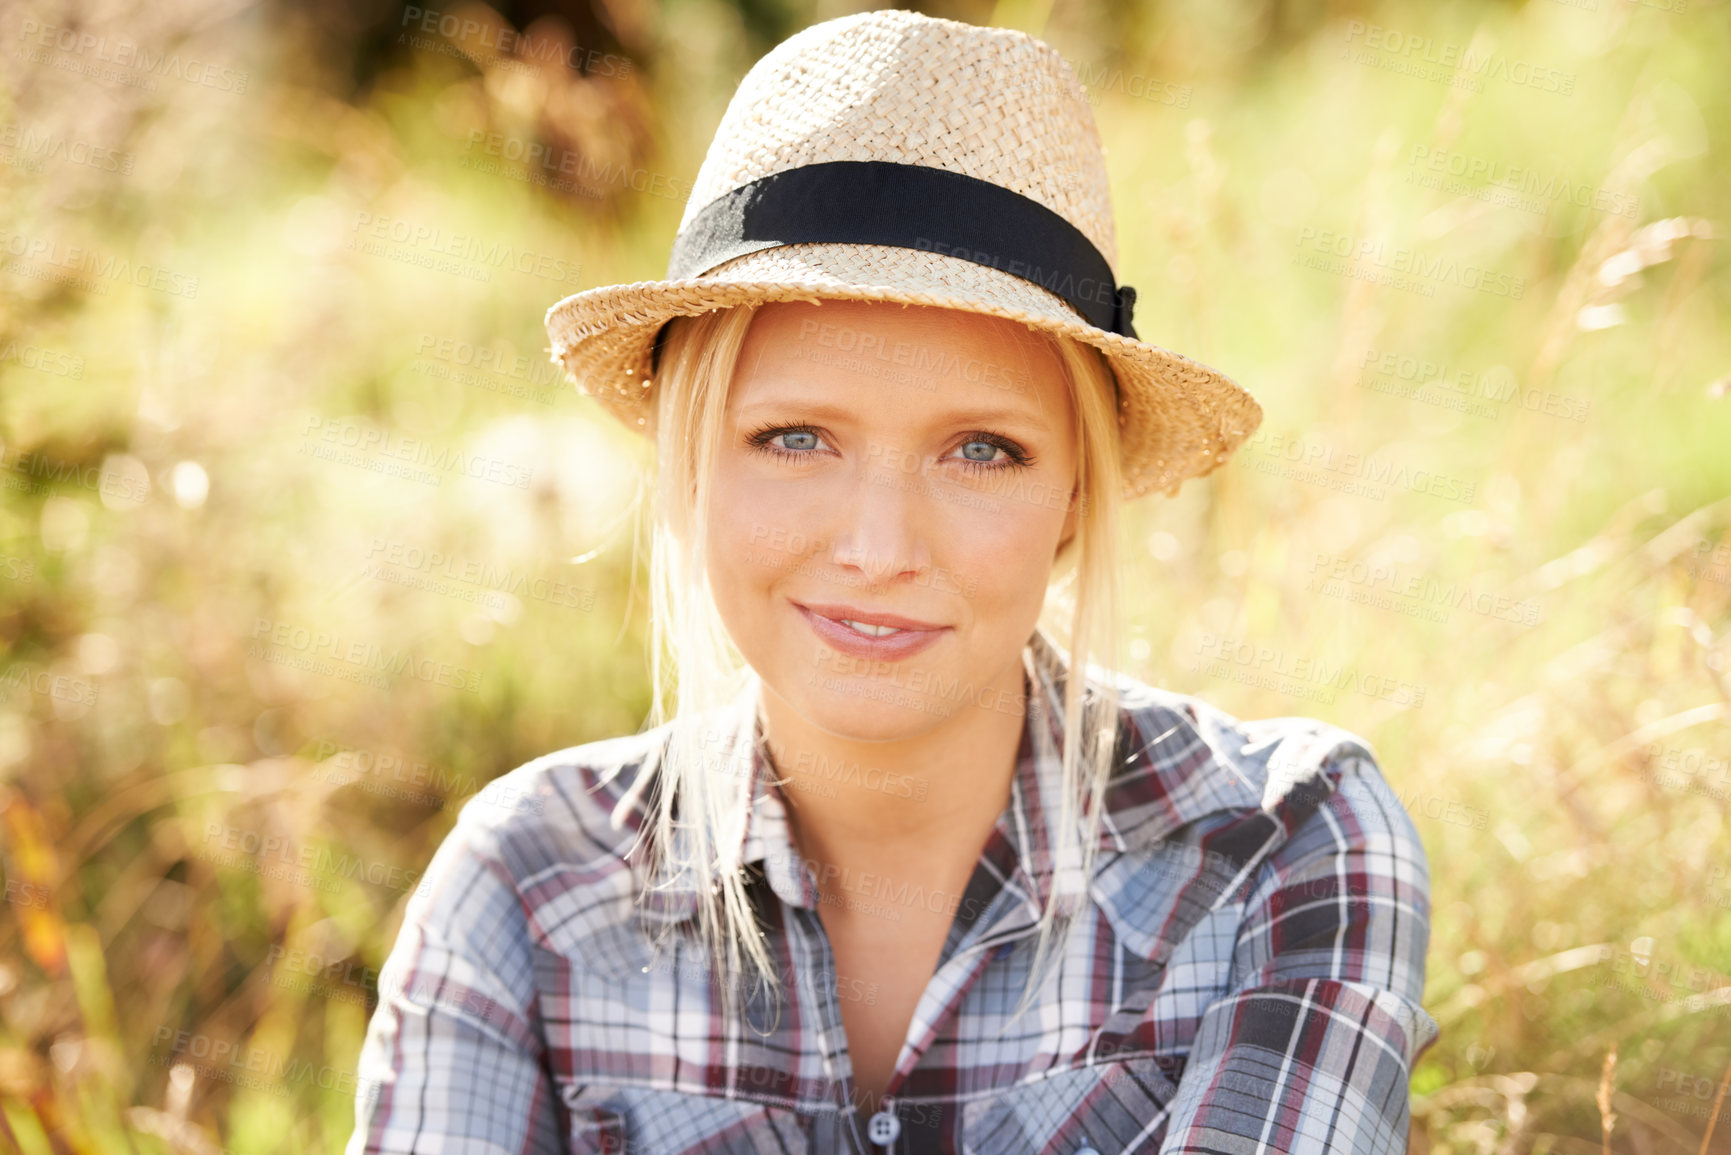 Buy stock photo Happy, portrait and young woman in nature with a straw hat sitting in an outdoor garden for fresh air. Smile, fashion and female person from Australia in the forest, woods or field with casual style.